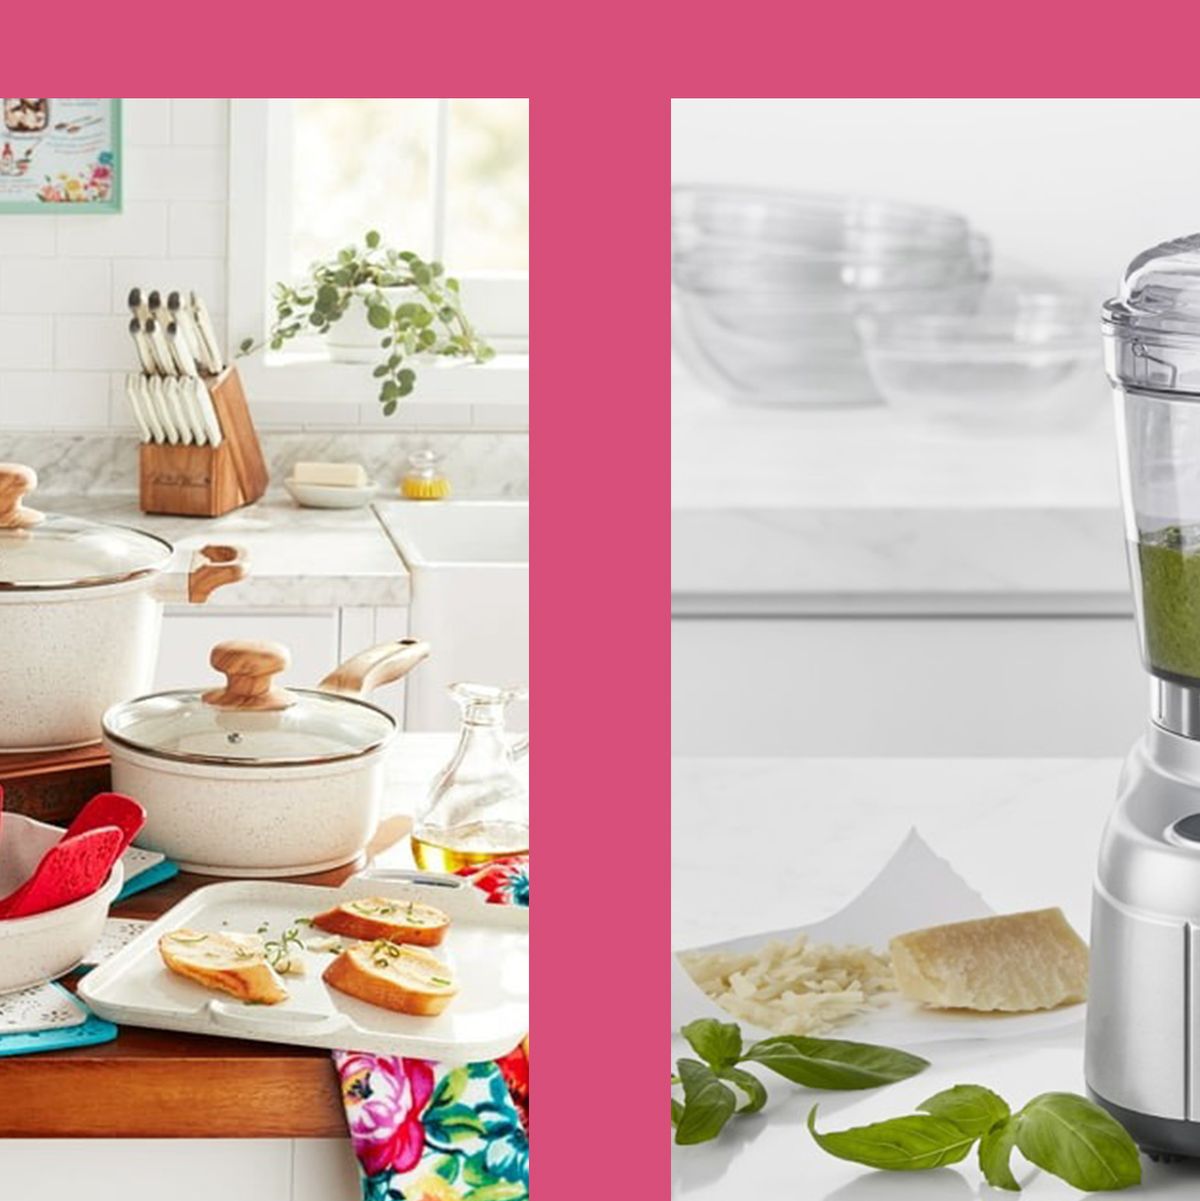 Find Pioneer Woman cookware, bakeware, kitchen gifts for under $50 